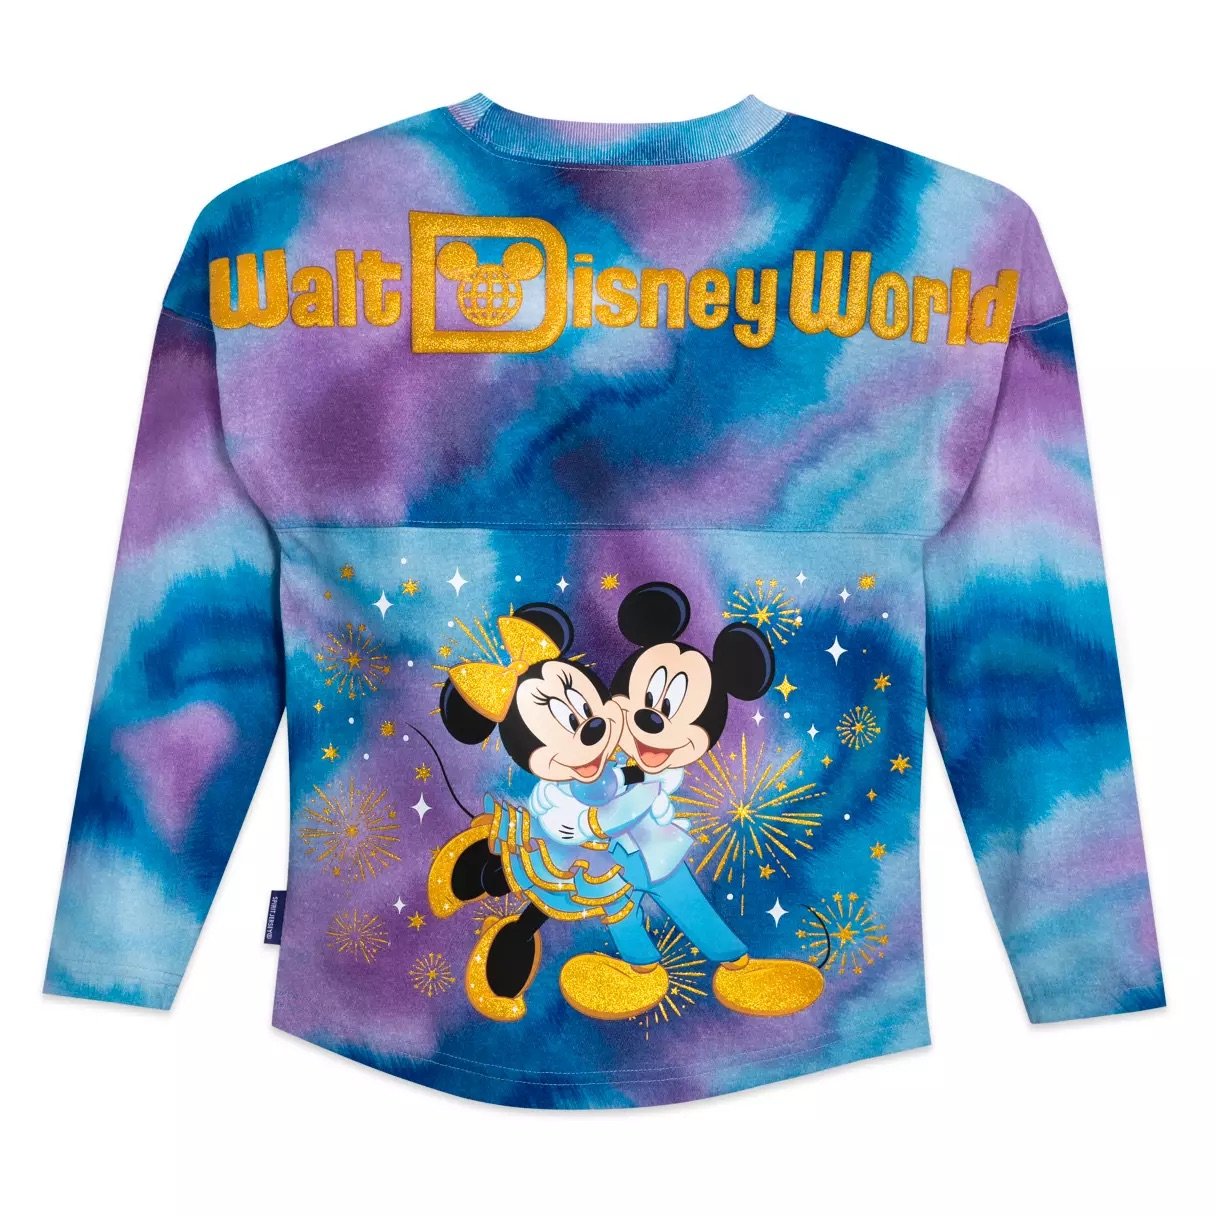 Style in Shimmery Tie-Dye With This NEW 50th Anniversary Spirit Jersey 